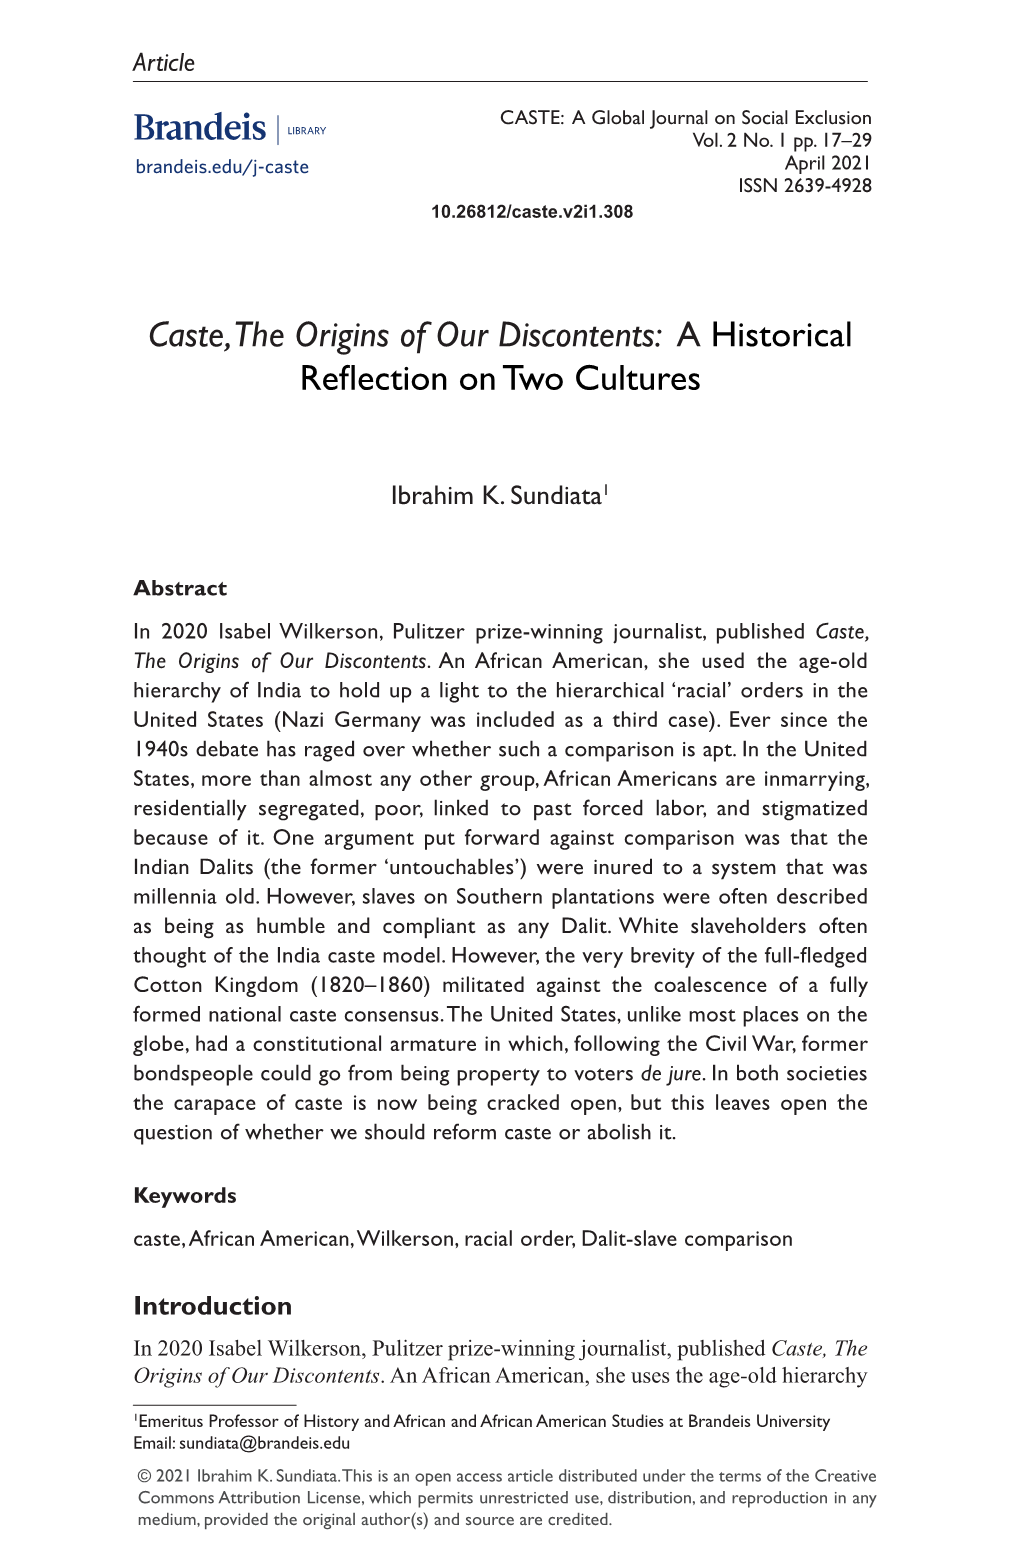 Caste, the Origins of Our Discontents: a Historical Reflection on Two Cultures